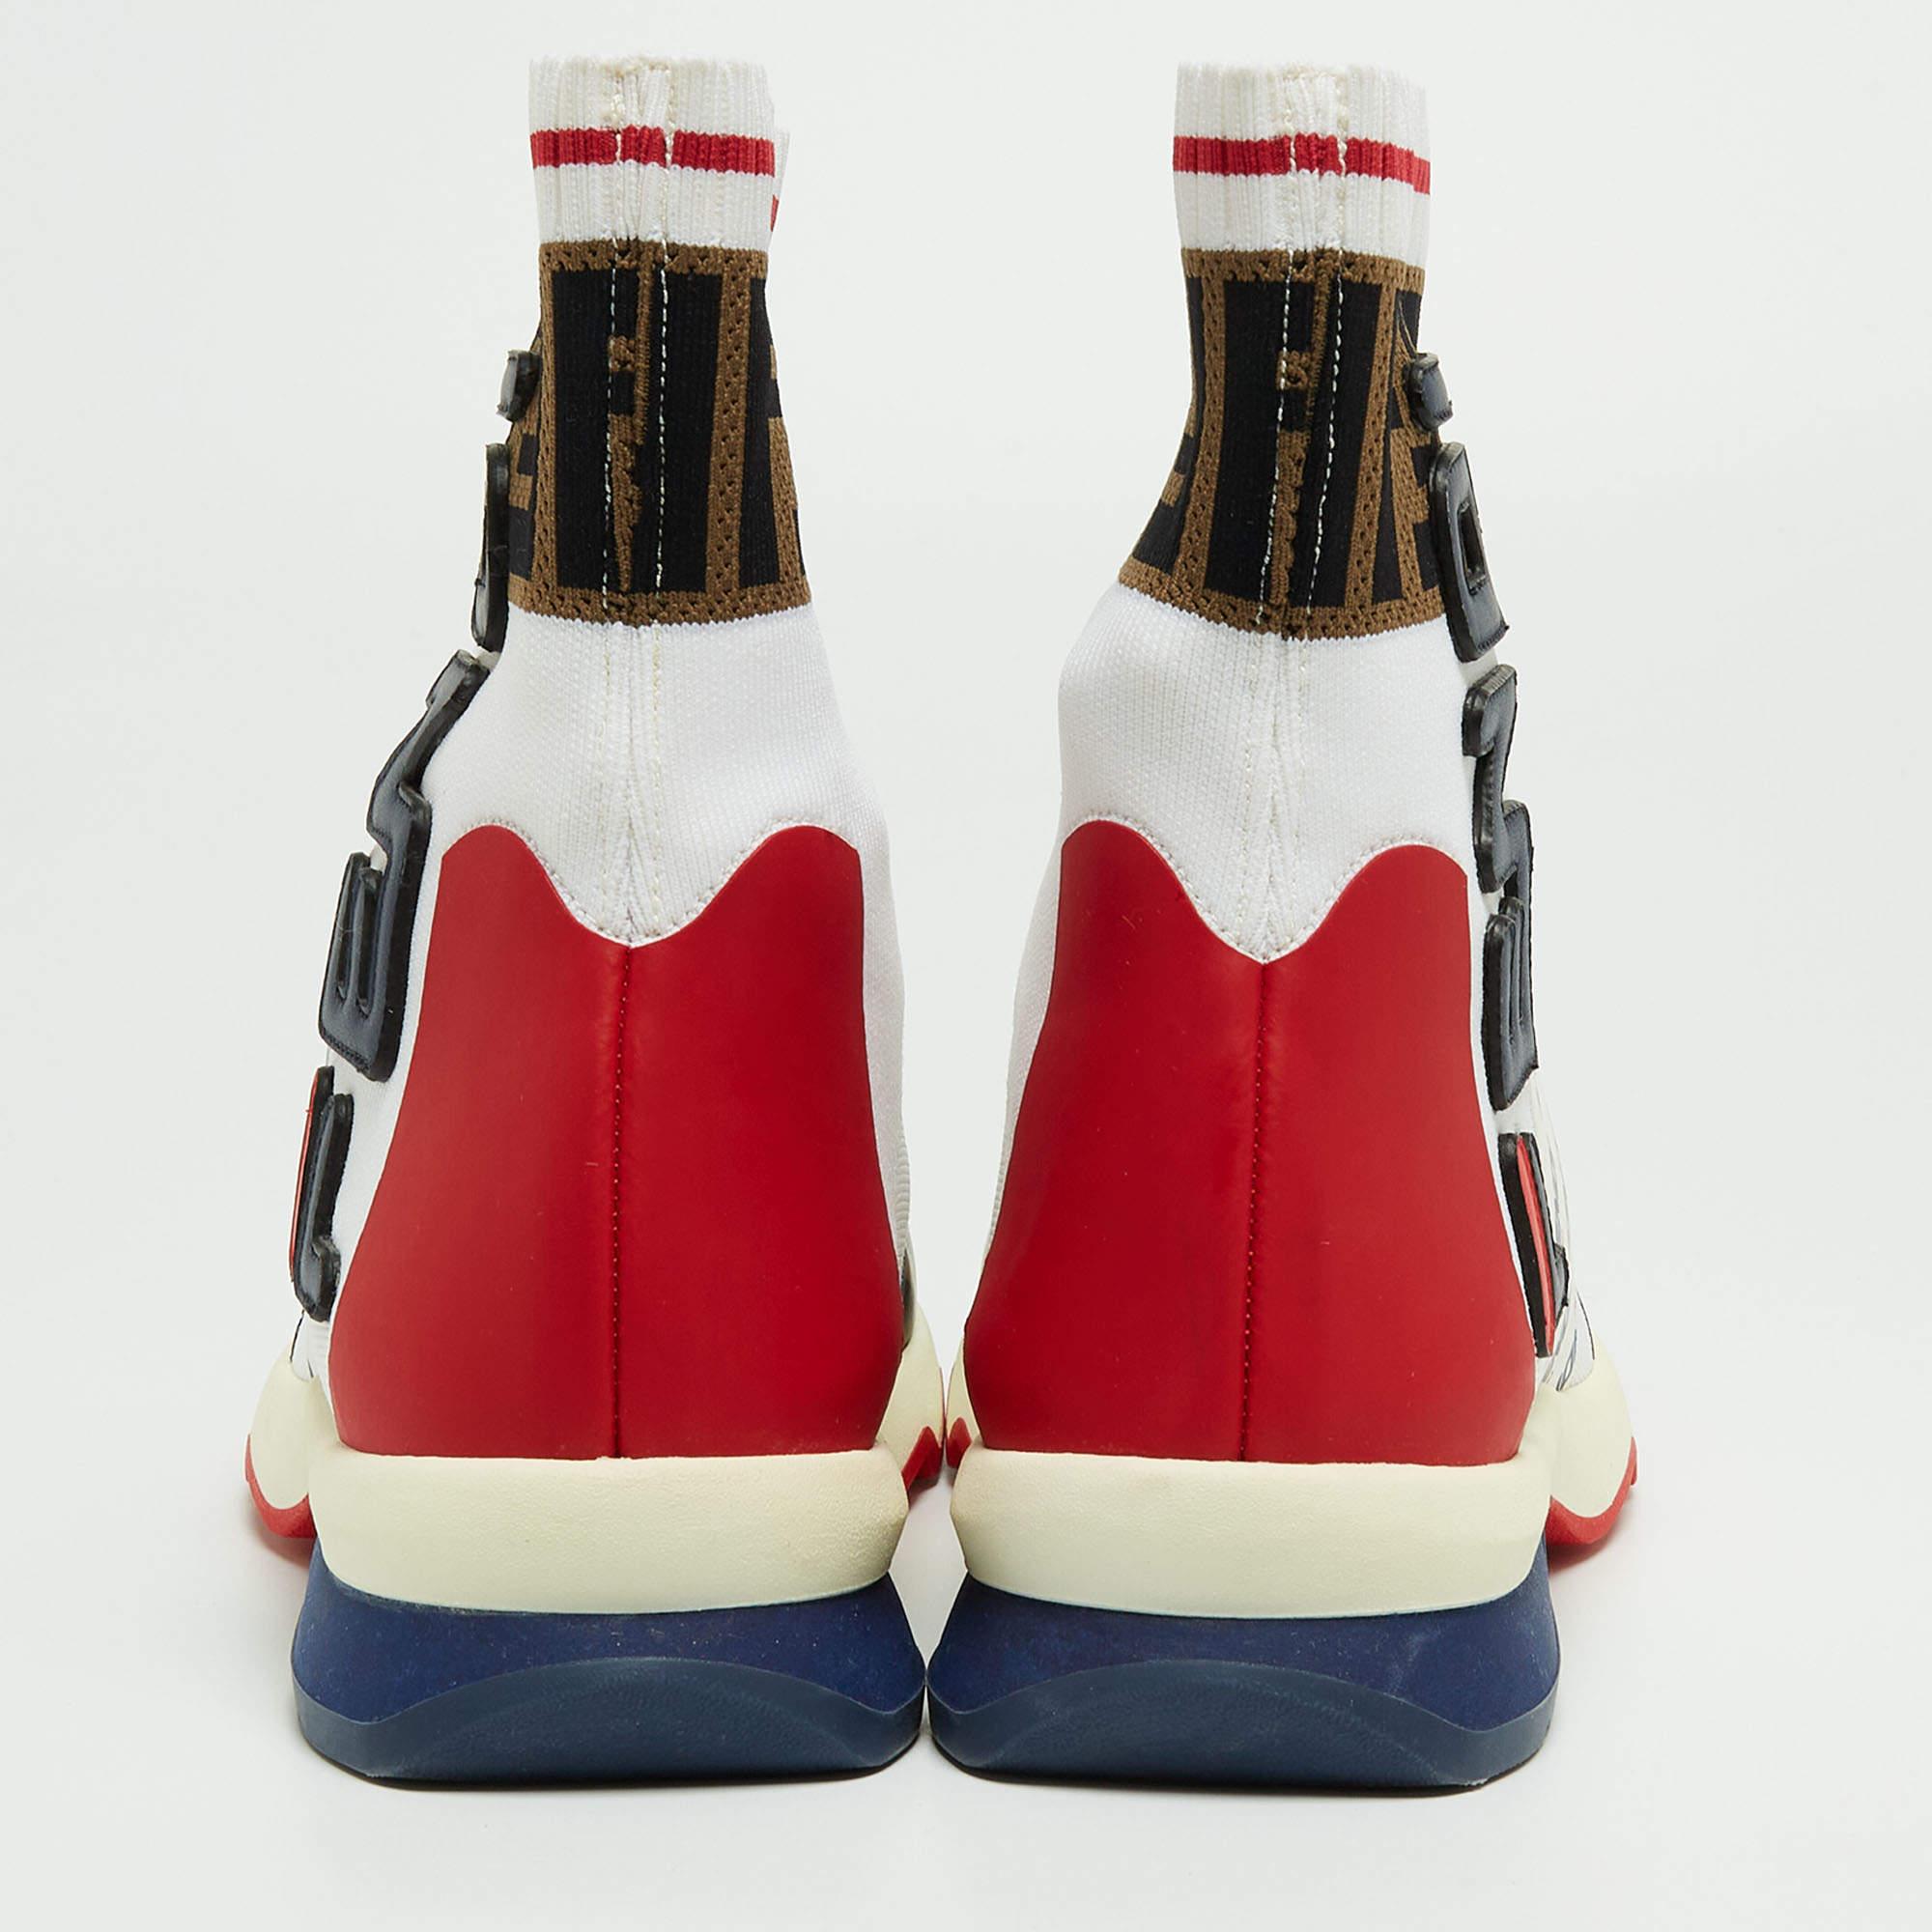 Fendi x Fila Tricolor Knit Fabric and Leather Mania Sock Sneakers Size 38 For Sale 1